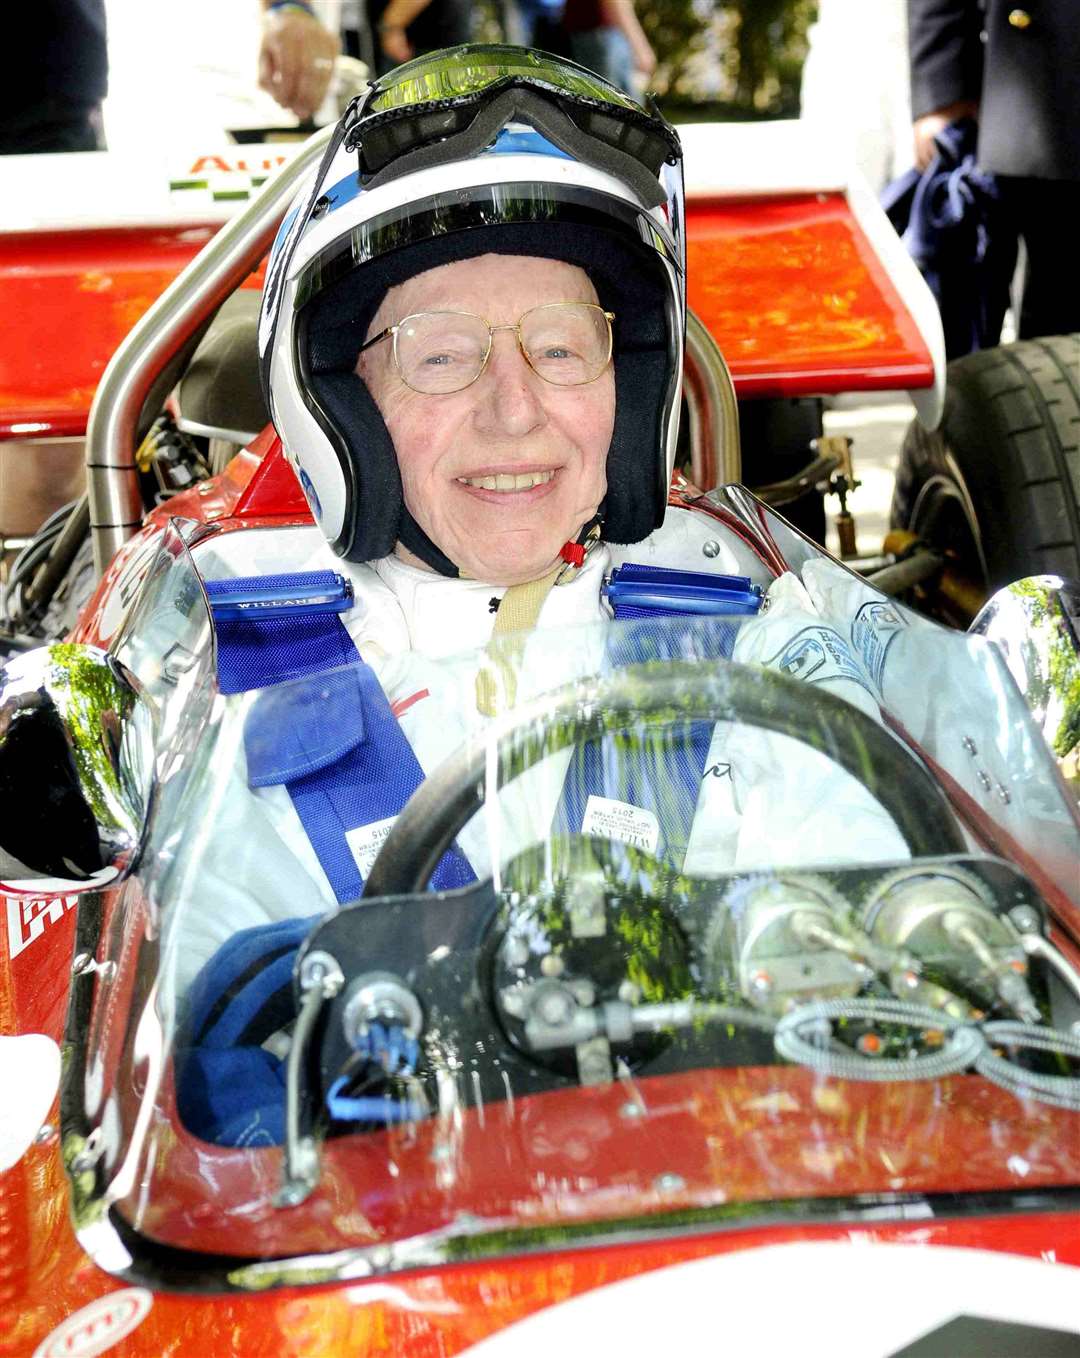 Surtees in his 1970 Surtees TS7 F1 car at the Goodwood Festival of Speed in 2015. He said this about Buckmore in 2003: "Nationally, it can stand up to any challenge. In Kent, we have a full Brands Hatch and a mini-Brands Hatch which is Buckmore. It is recognised as a superb drivers' circuit. If you can drive Buckmore, you can drive anywhere." Picture: Simon Hildrew